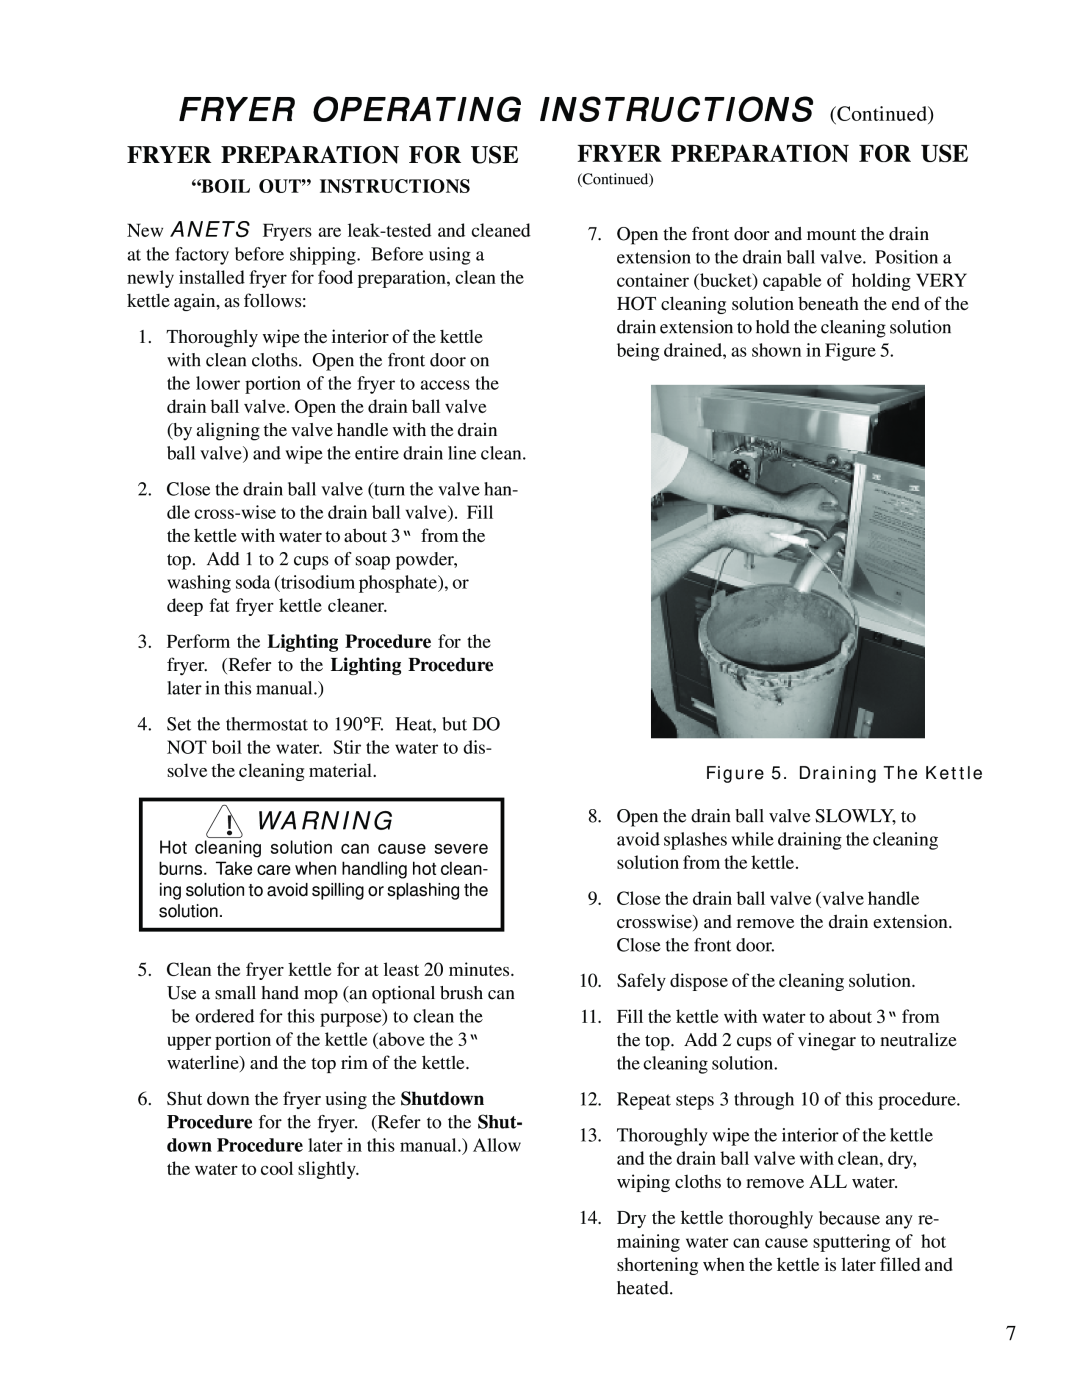 Anetsberger Brothers CF14 FRYER OPERATING INSTRUCTIONS Continued, Fryer Preparation For Use, “Boil Out” Instructions 